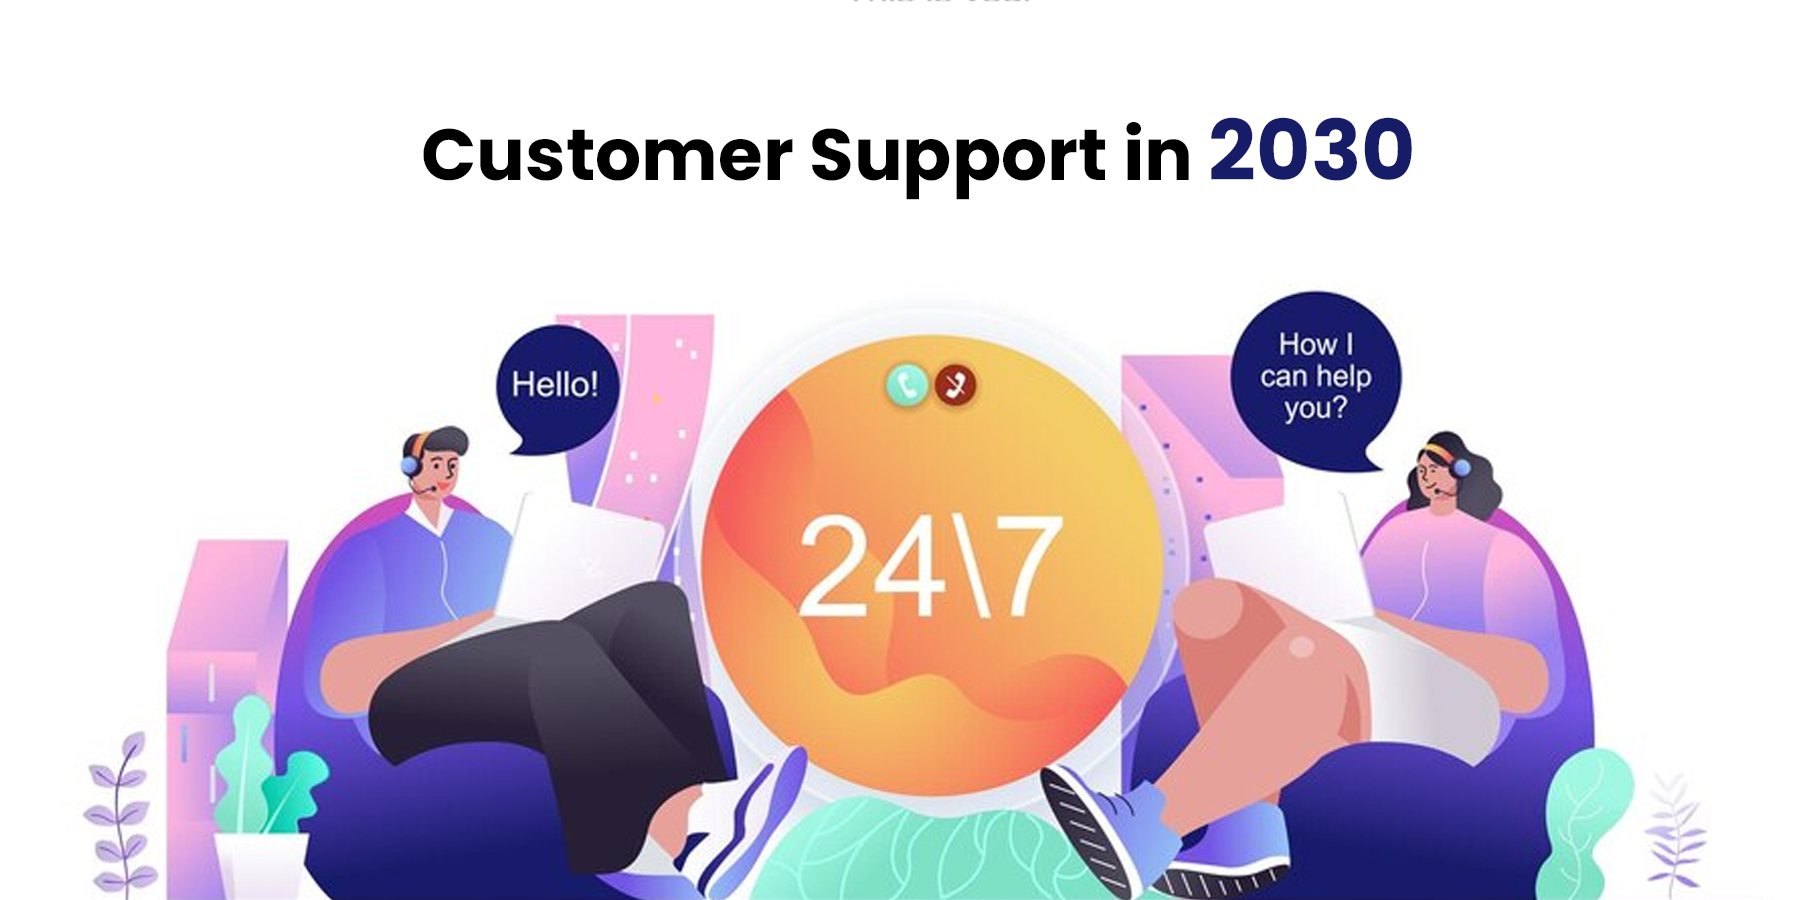 Customer Support in 2030